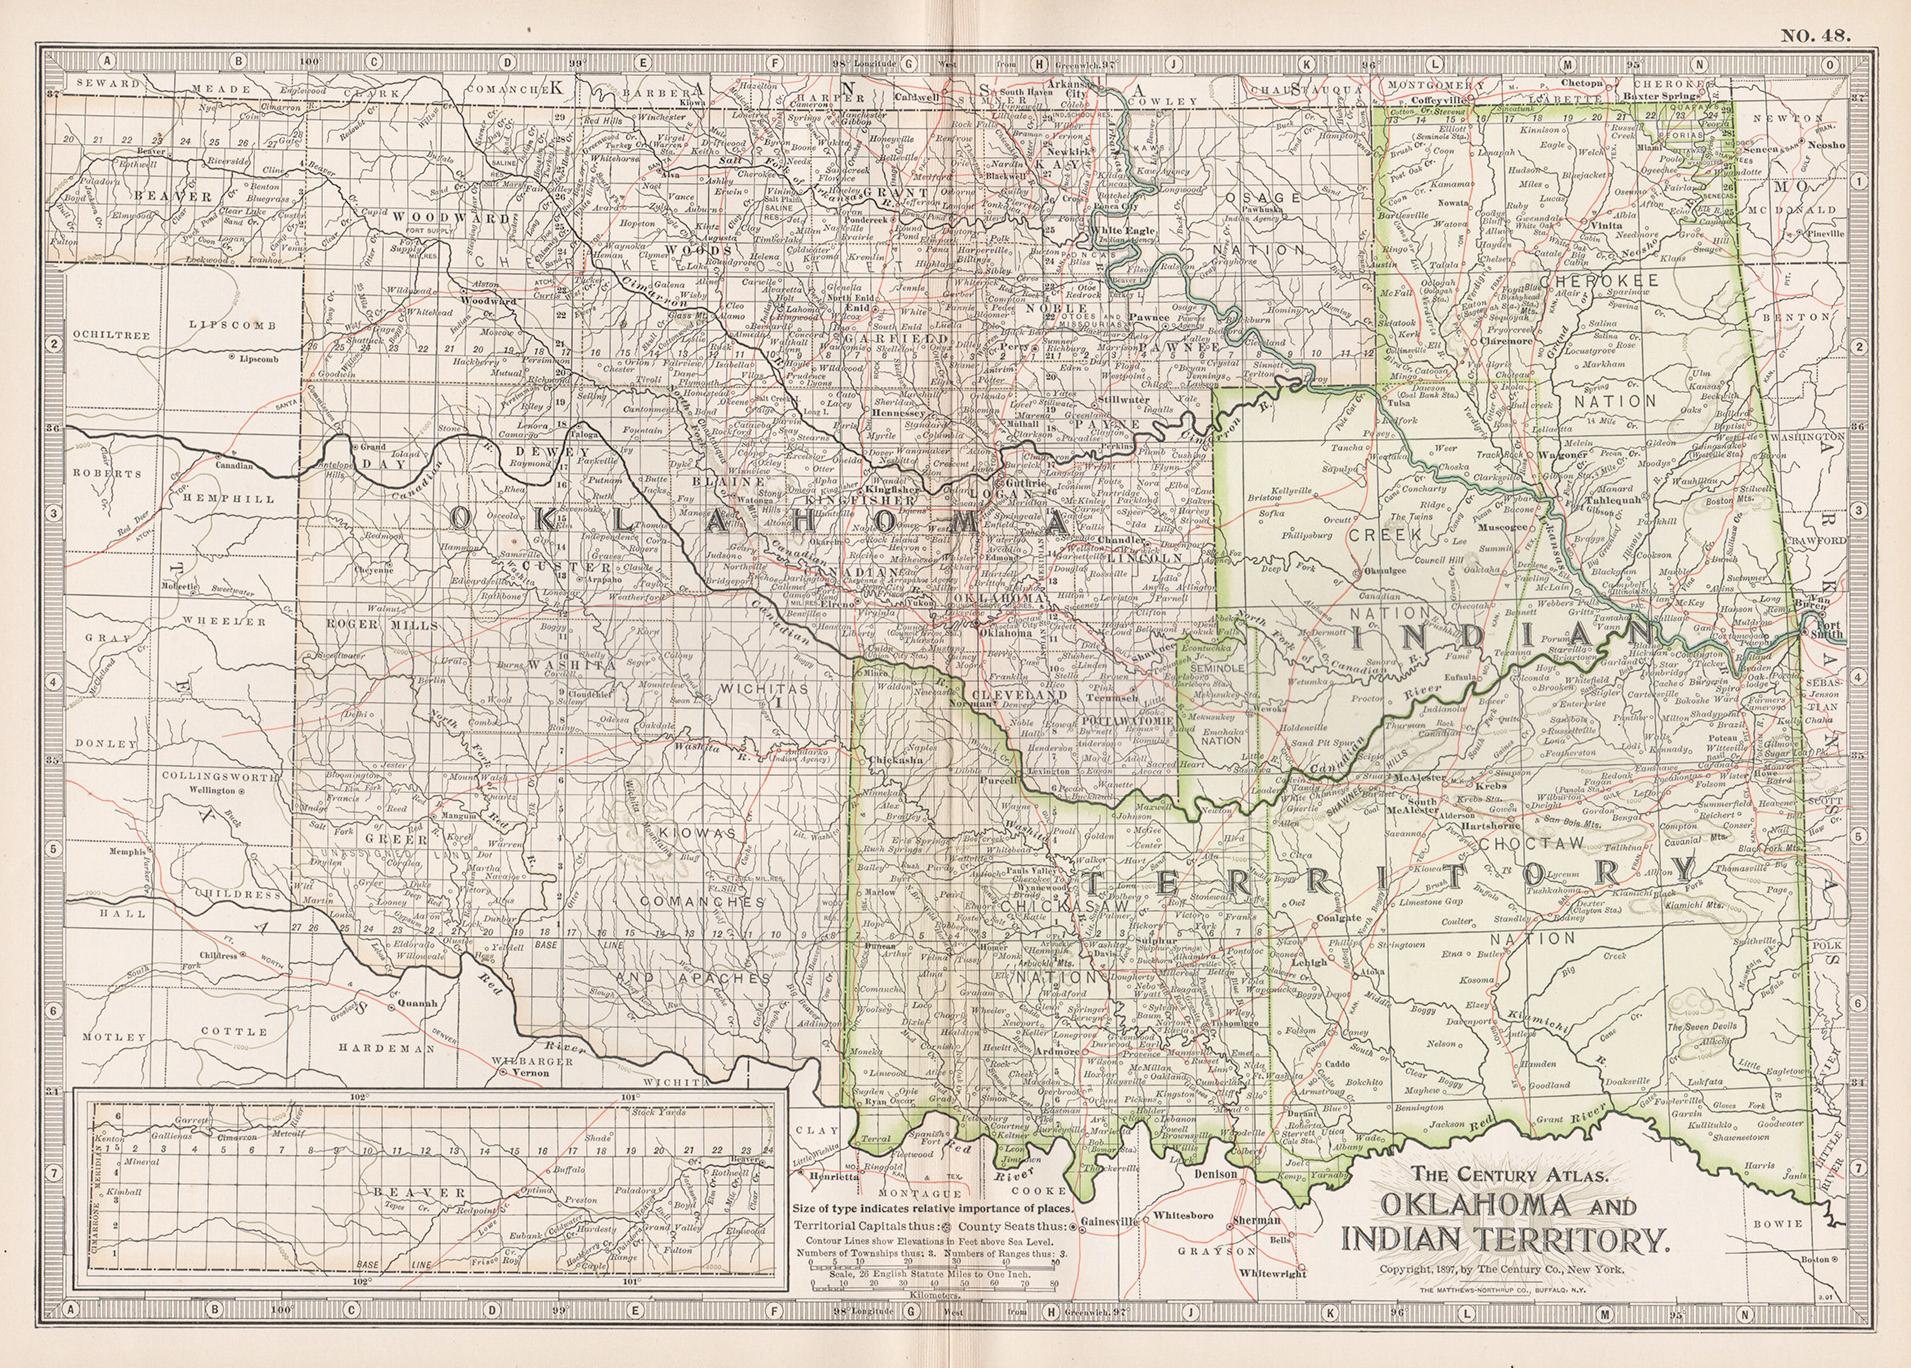 Unknown Print - Oklahoma and Indian Territory. USA. Century Atlas state antique vintage map